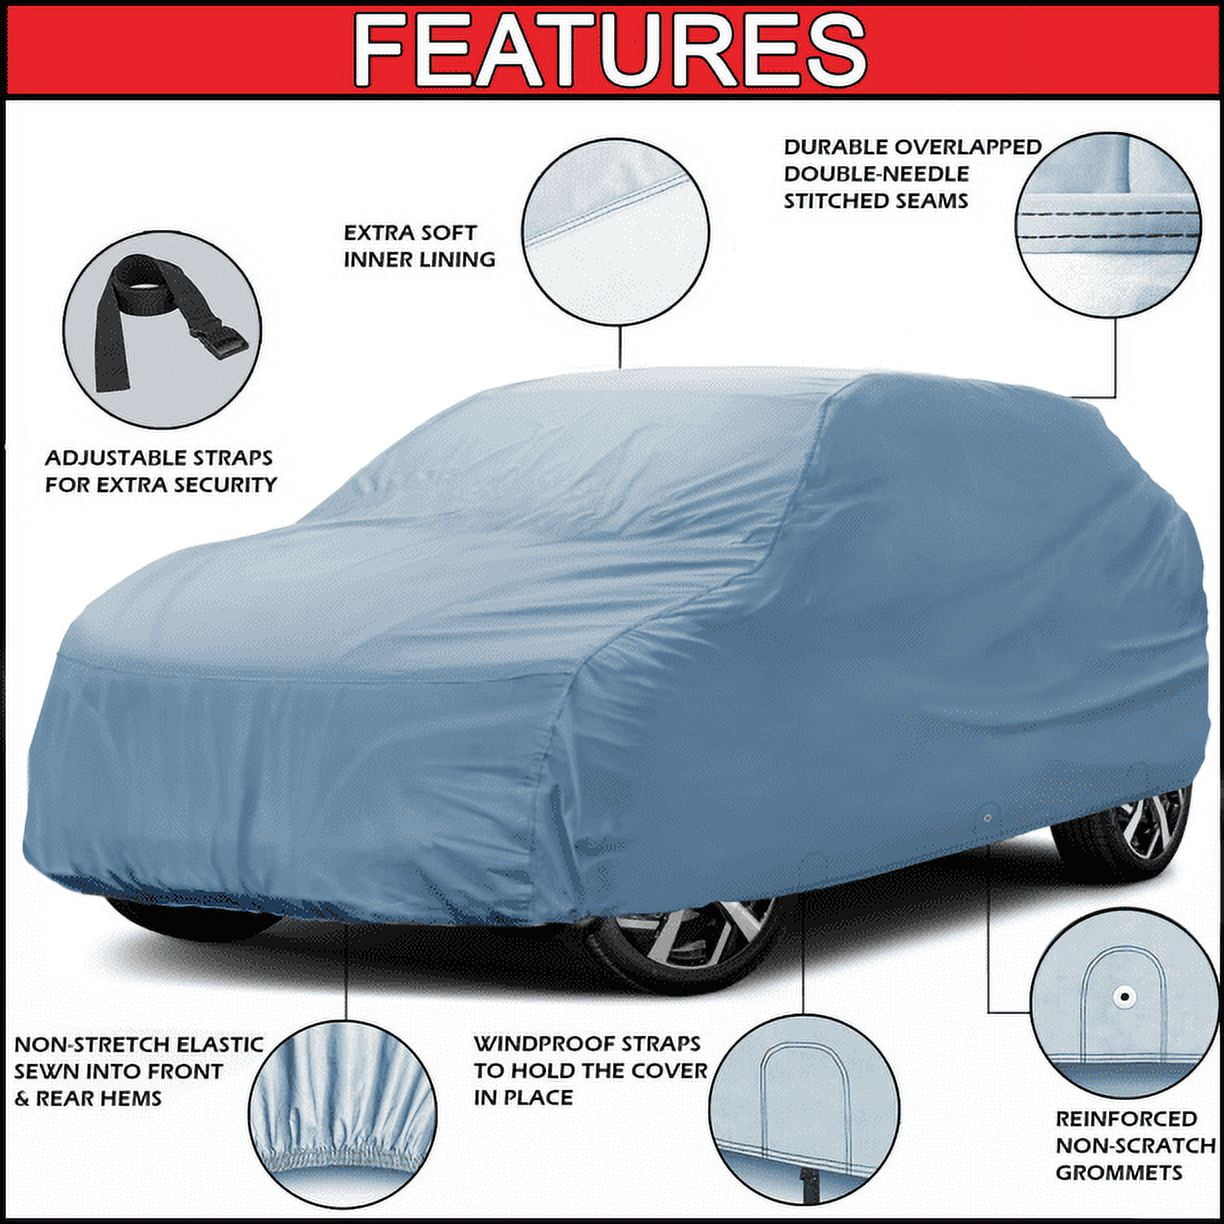  5 Layer Car Cover for 2020-2023 Tesla Model Y, Semi